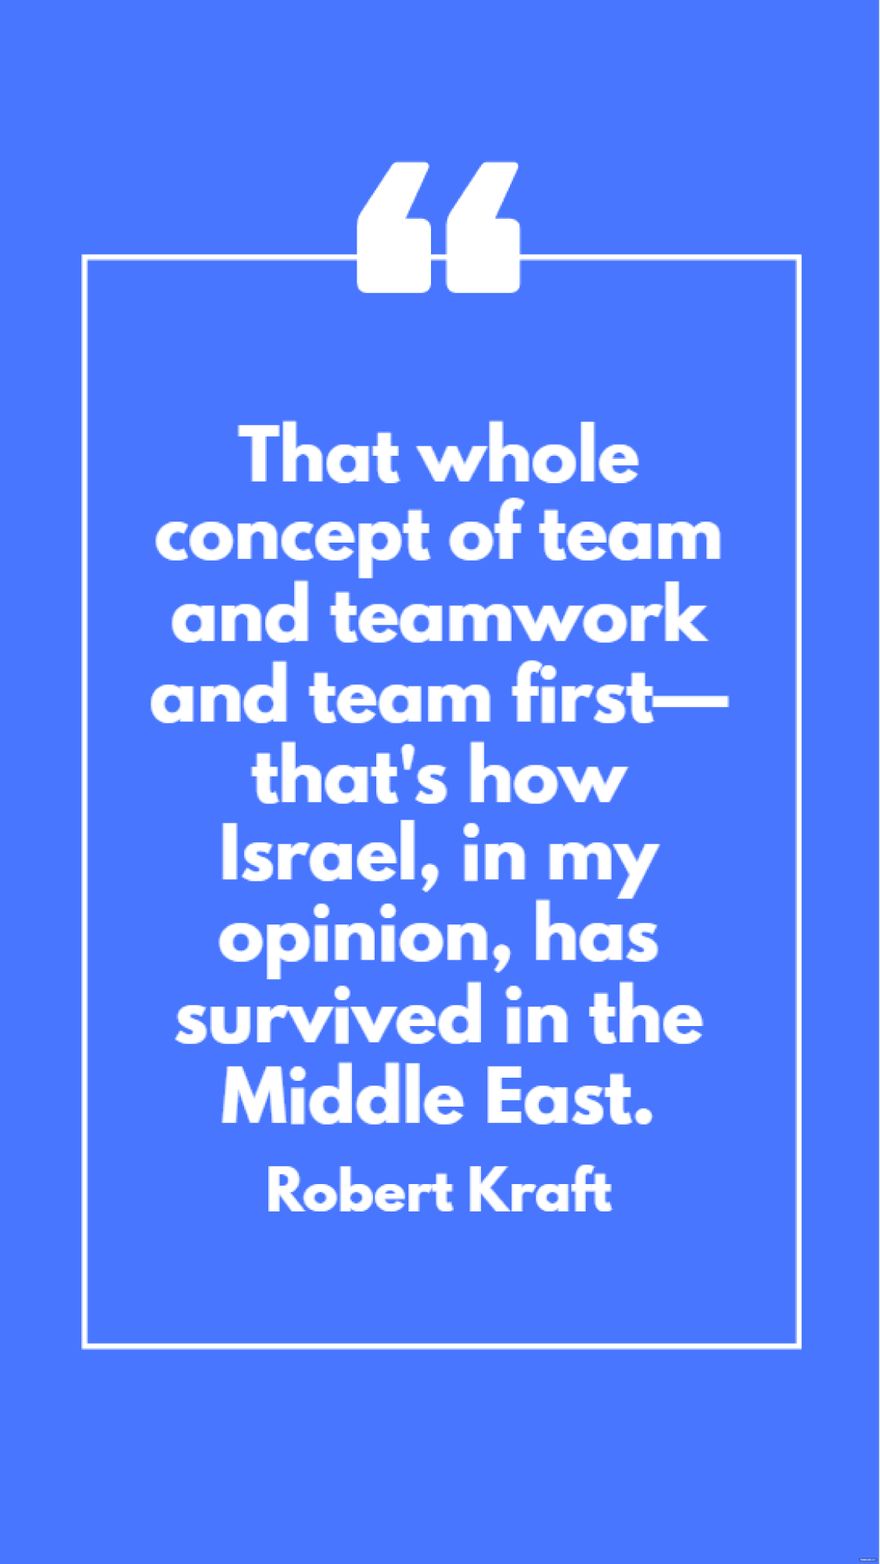 Free Robert Kraft - That whole concept of team and teamwork and team first - that's how Israel, in my opinion, has survived in the Middle East. in JPG